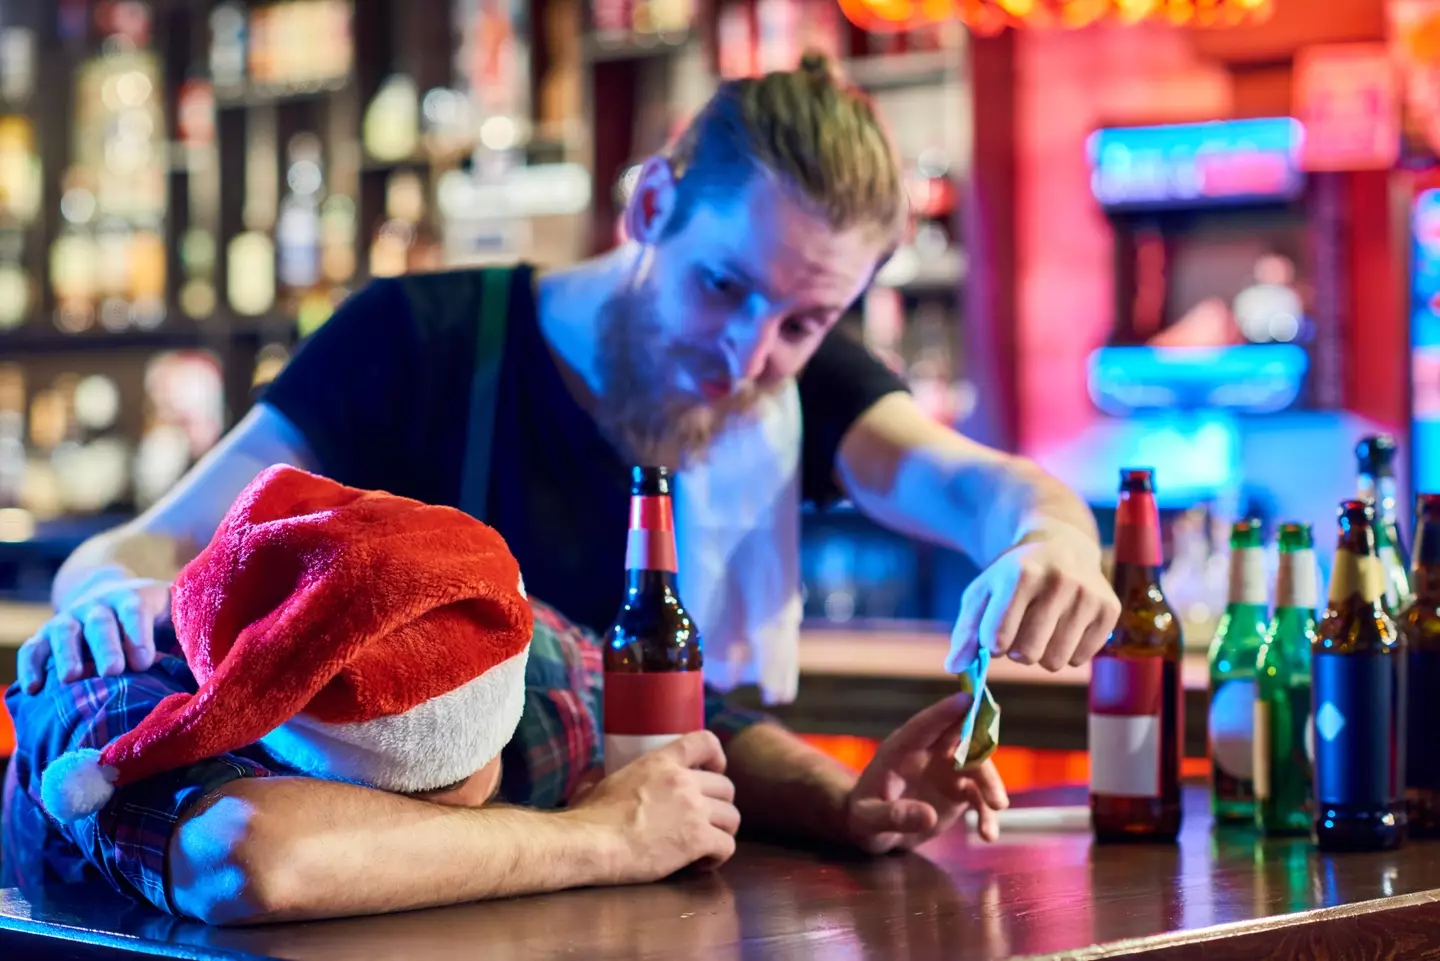 When it comes to the work Christmas party, there's always one person who gets too drunk.